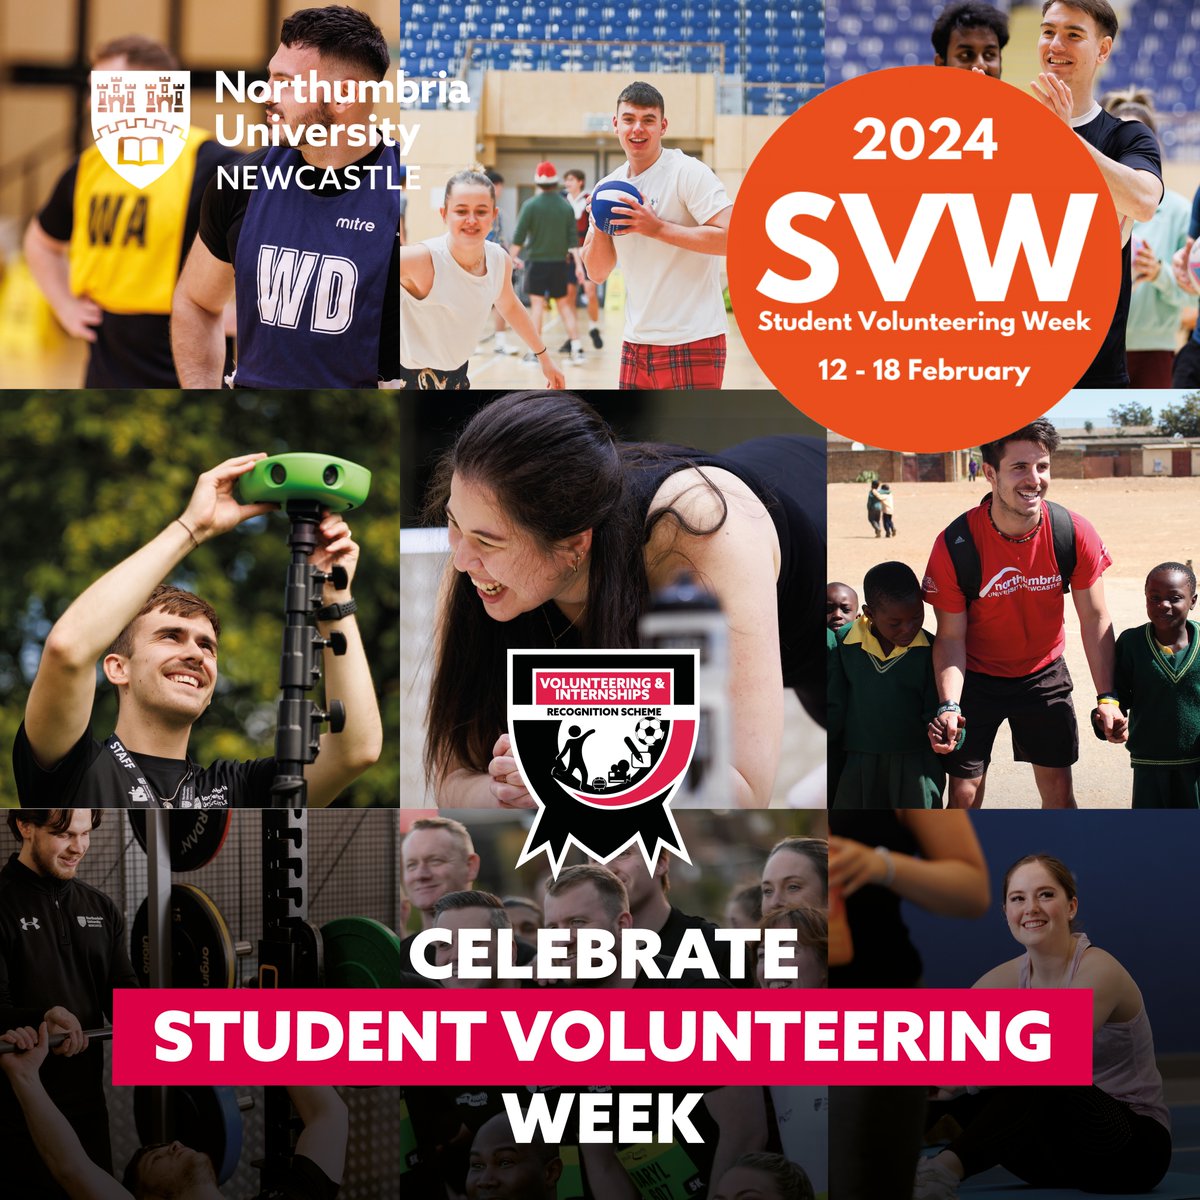 It’s Student Volunteering Week and we want to recognise and thank all our volunteers for their contributions. We spoke to a few of our current volunteers to get them to share their experiences working with us. Here's what they had to say: orlo.uk/5VMw5